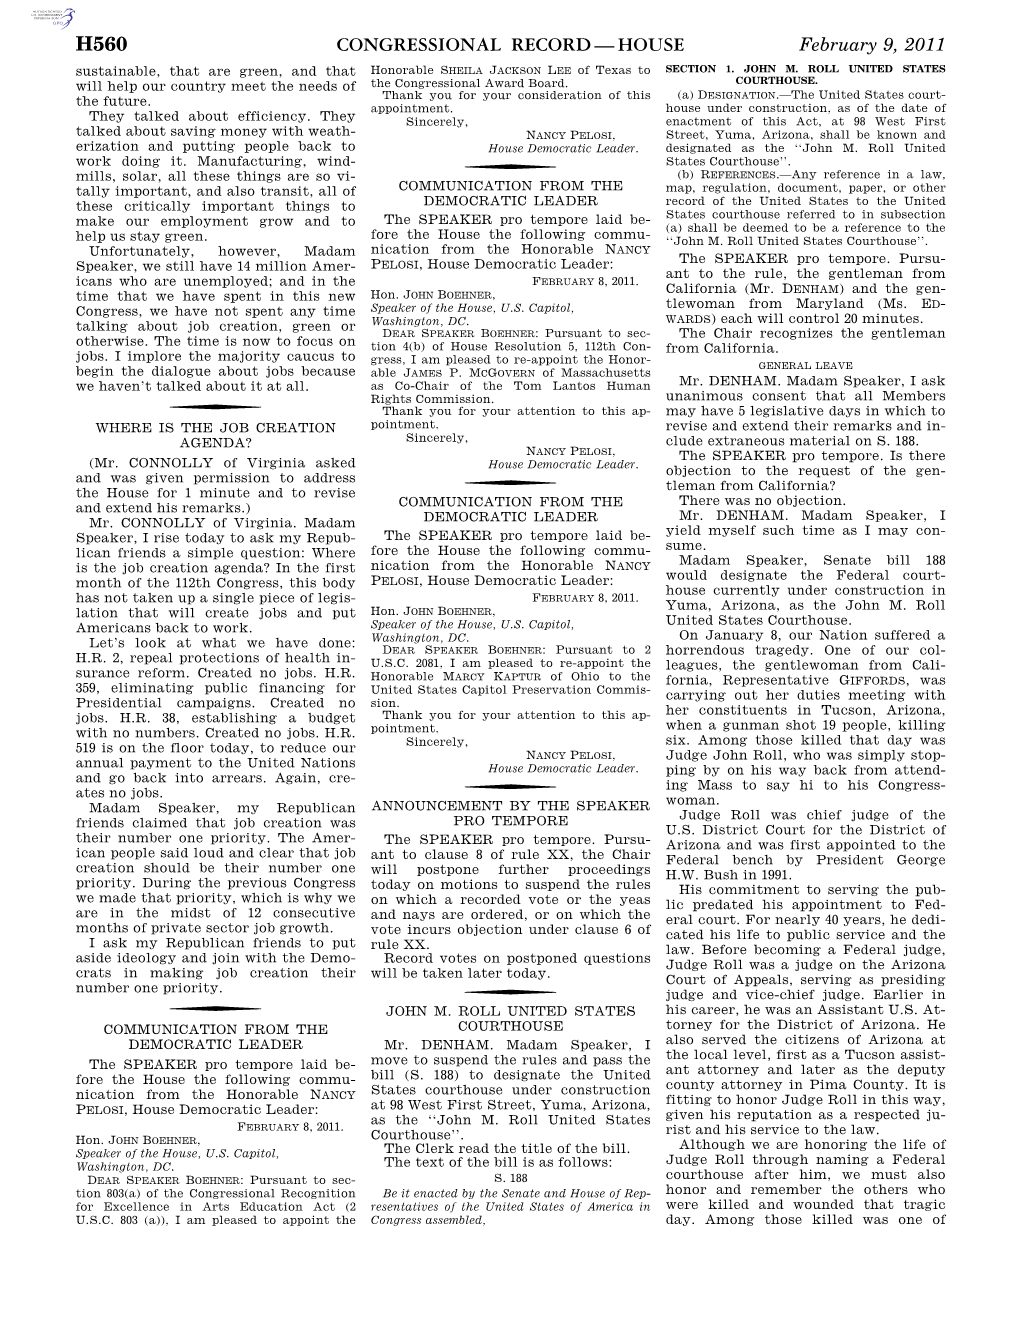 Congressional Record—House H560